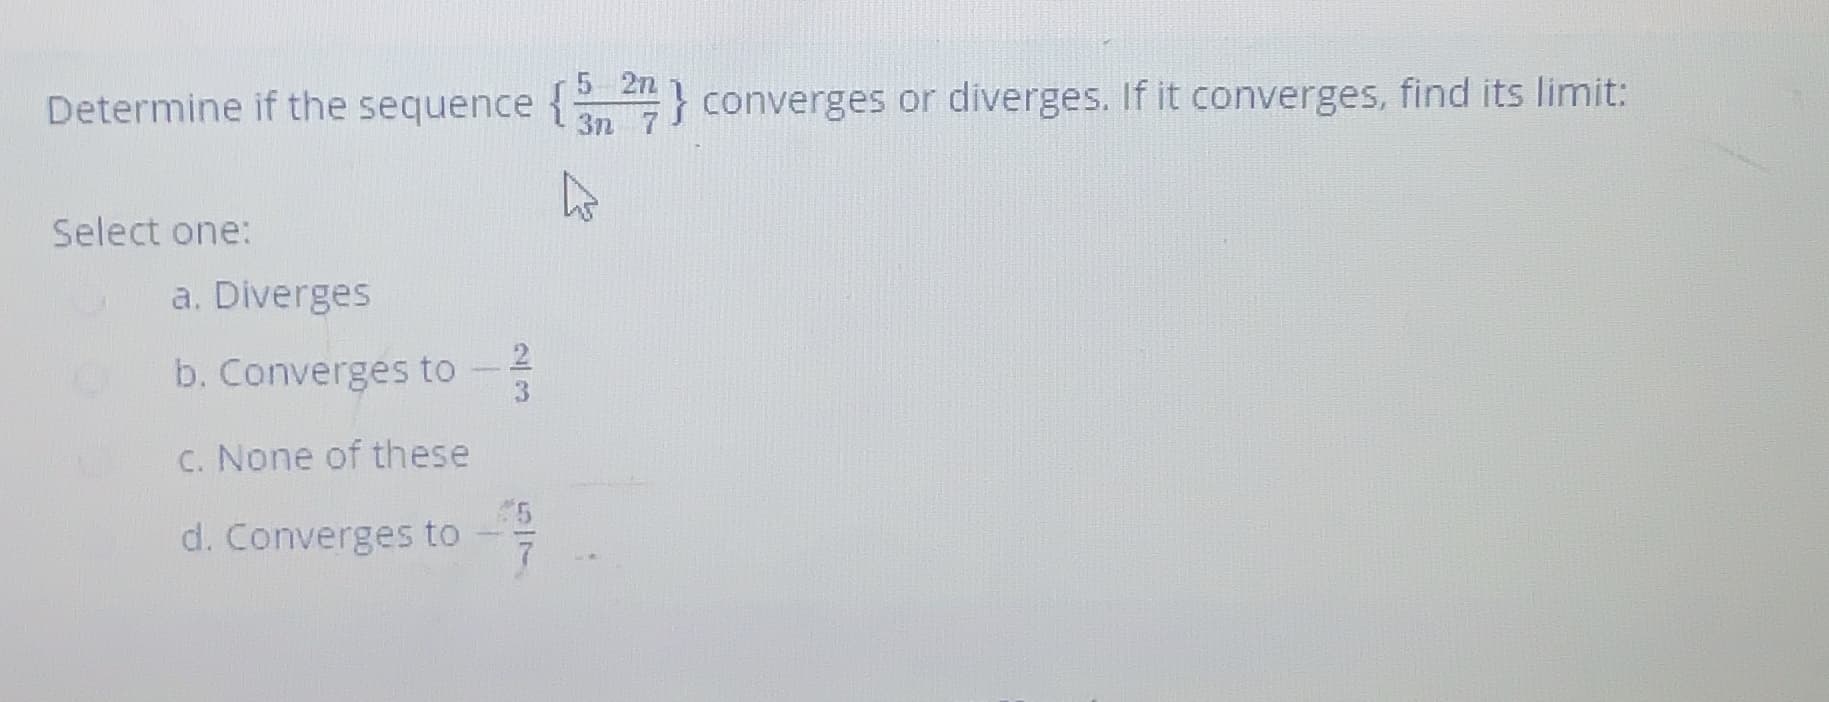 5 2n
Determine if the sequence {4} converges or diverges. If it converges, find its limit:
3n 7
Select one:
a. Diverges
b. Converges to -
C. None of these
d. Converges to
1/5
